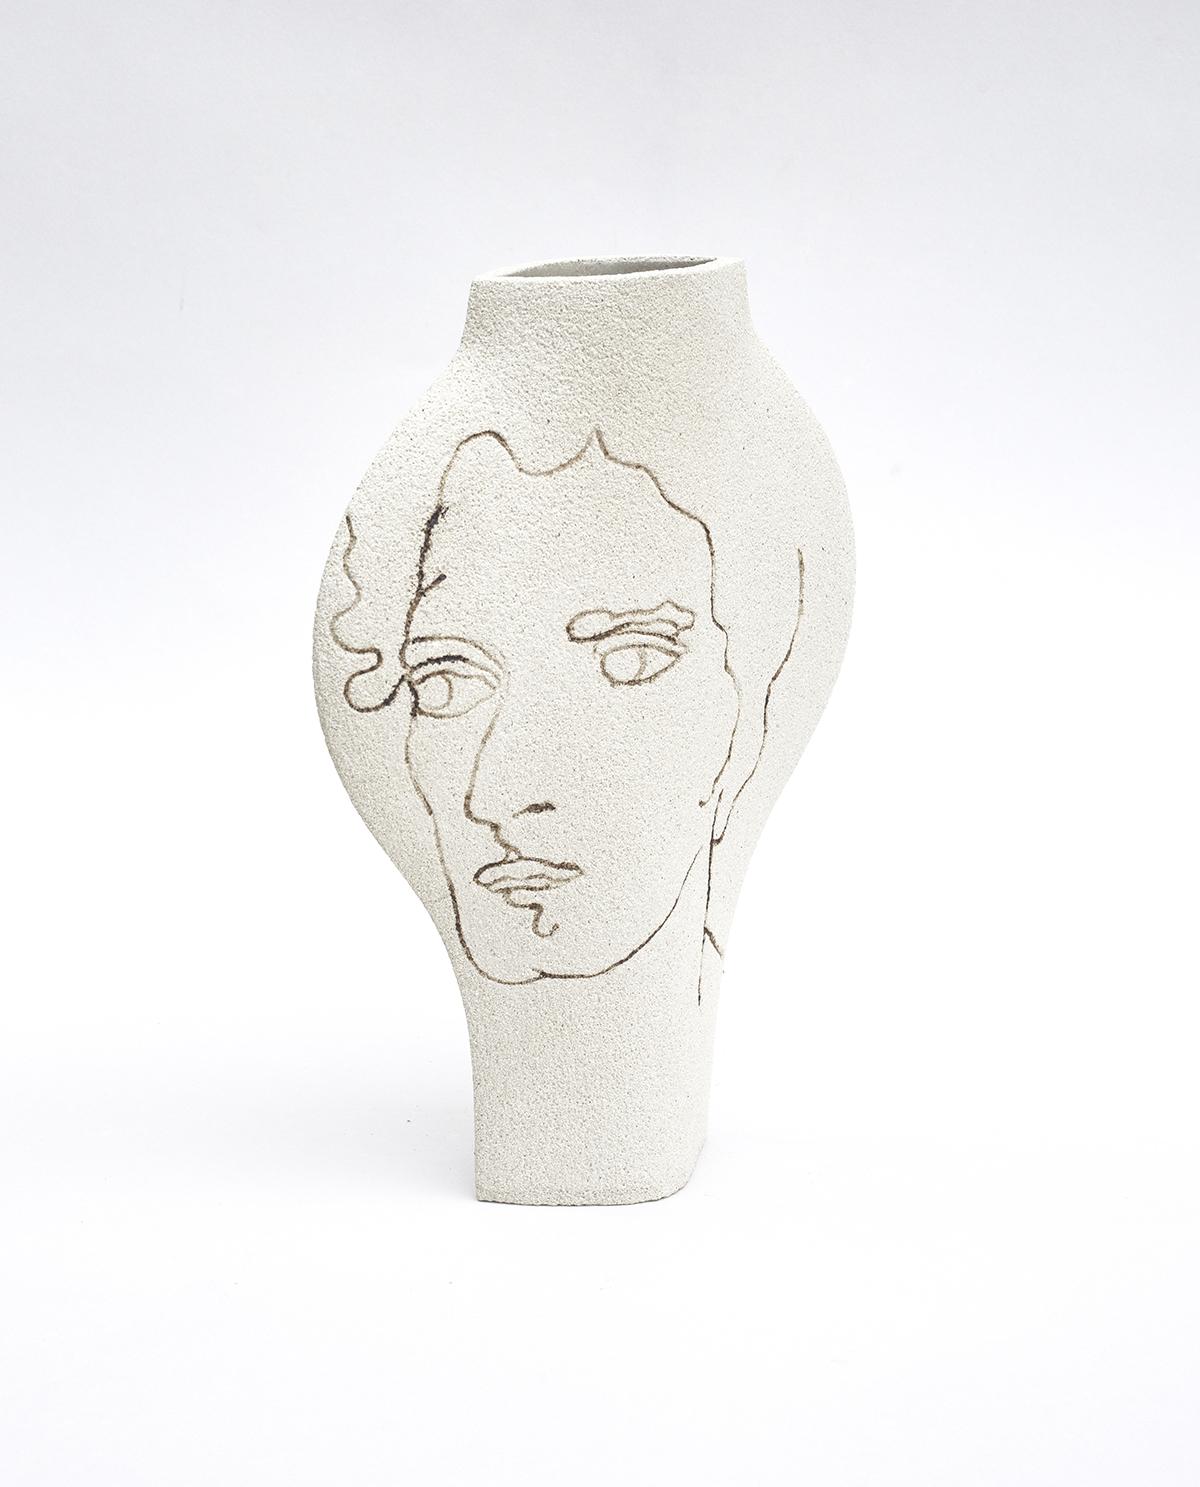 ‘Dal Visage’ Ceramic Vase 

This vase is part of a new series inspired by iconic Art (and more precisely paintings) movements. Here is our DAL model with motifs based on portrait illustration. They are hand-carved to the vase before its first